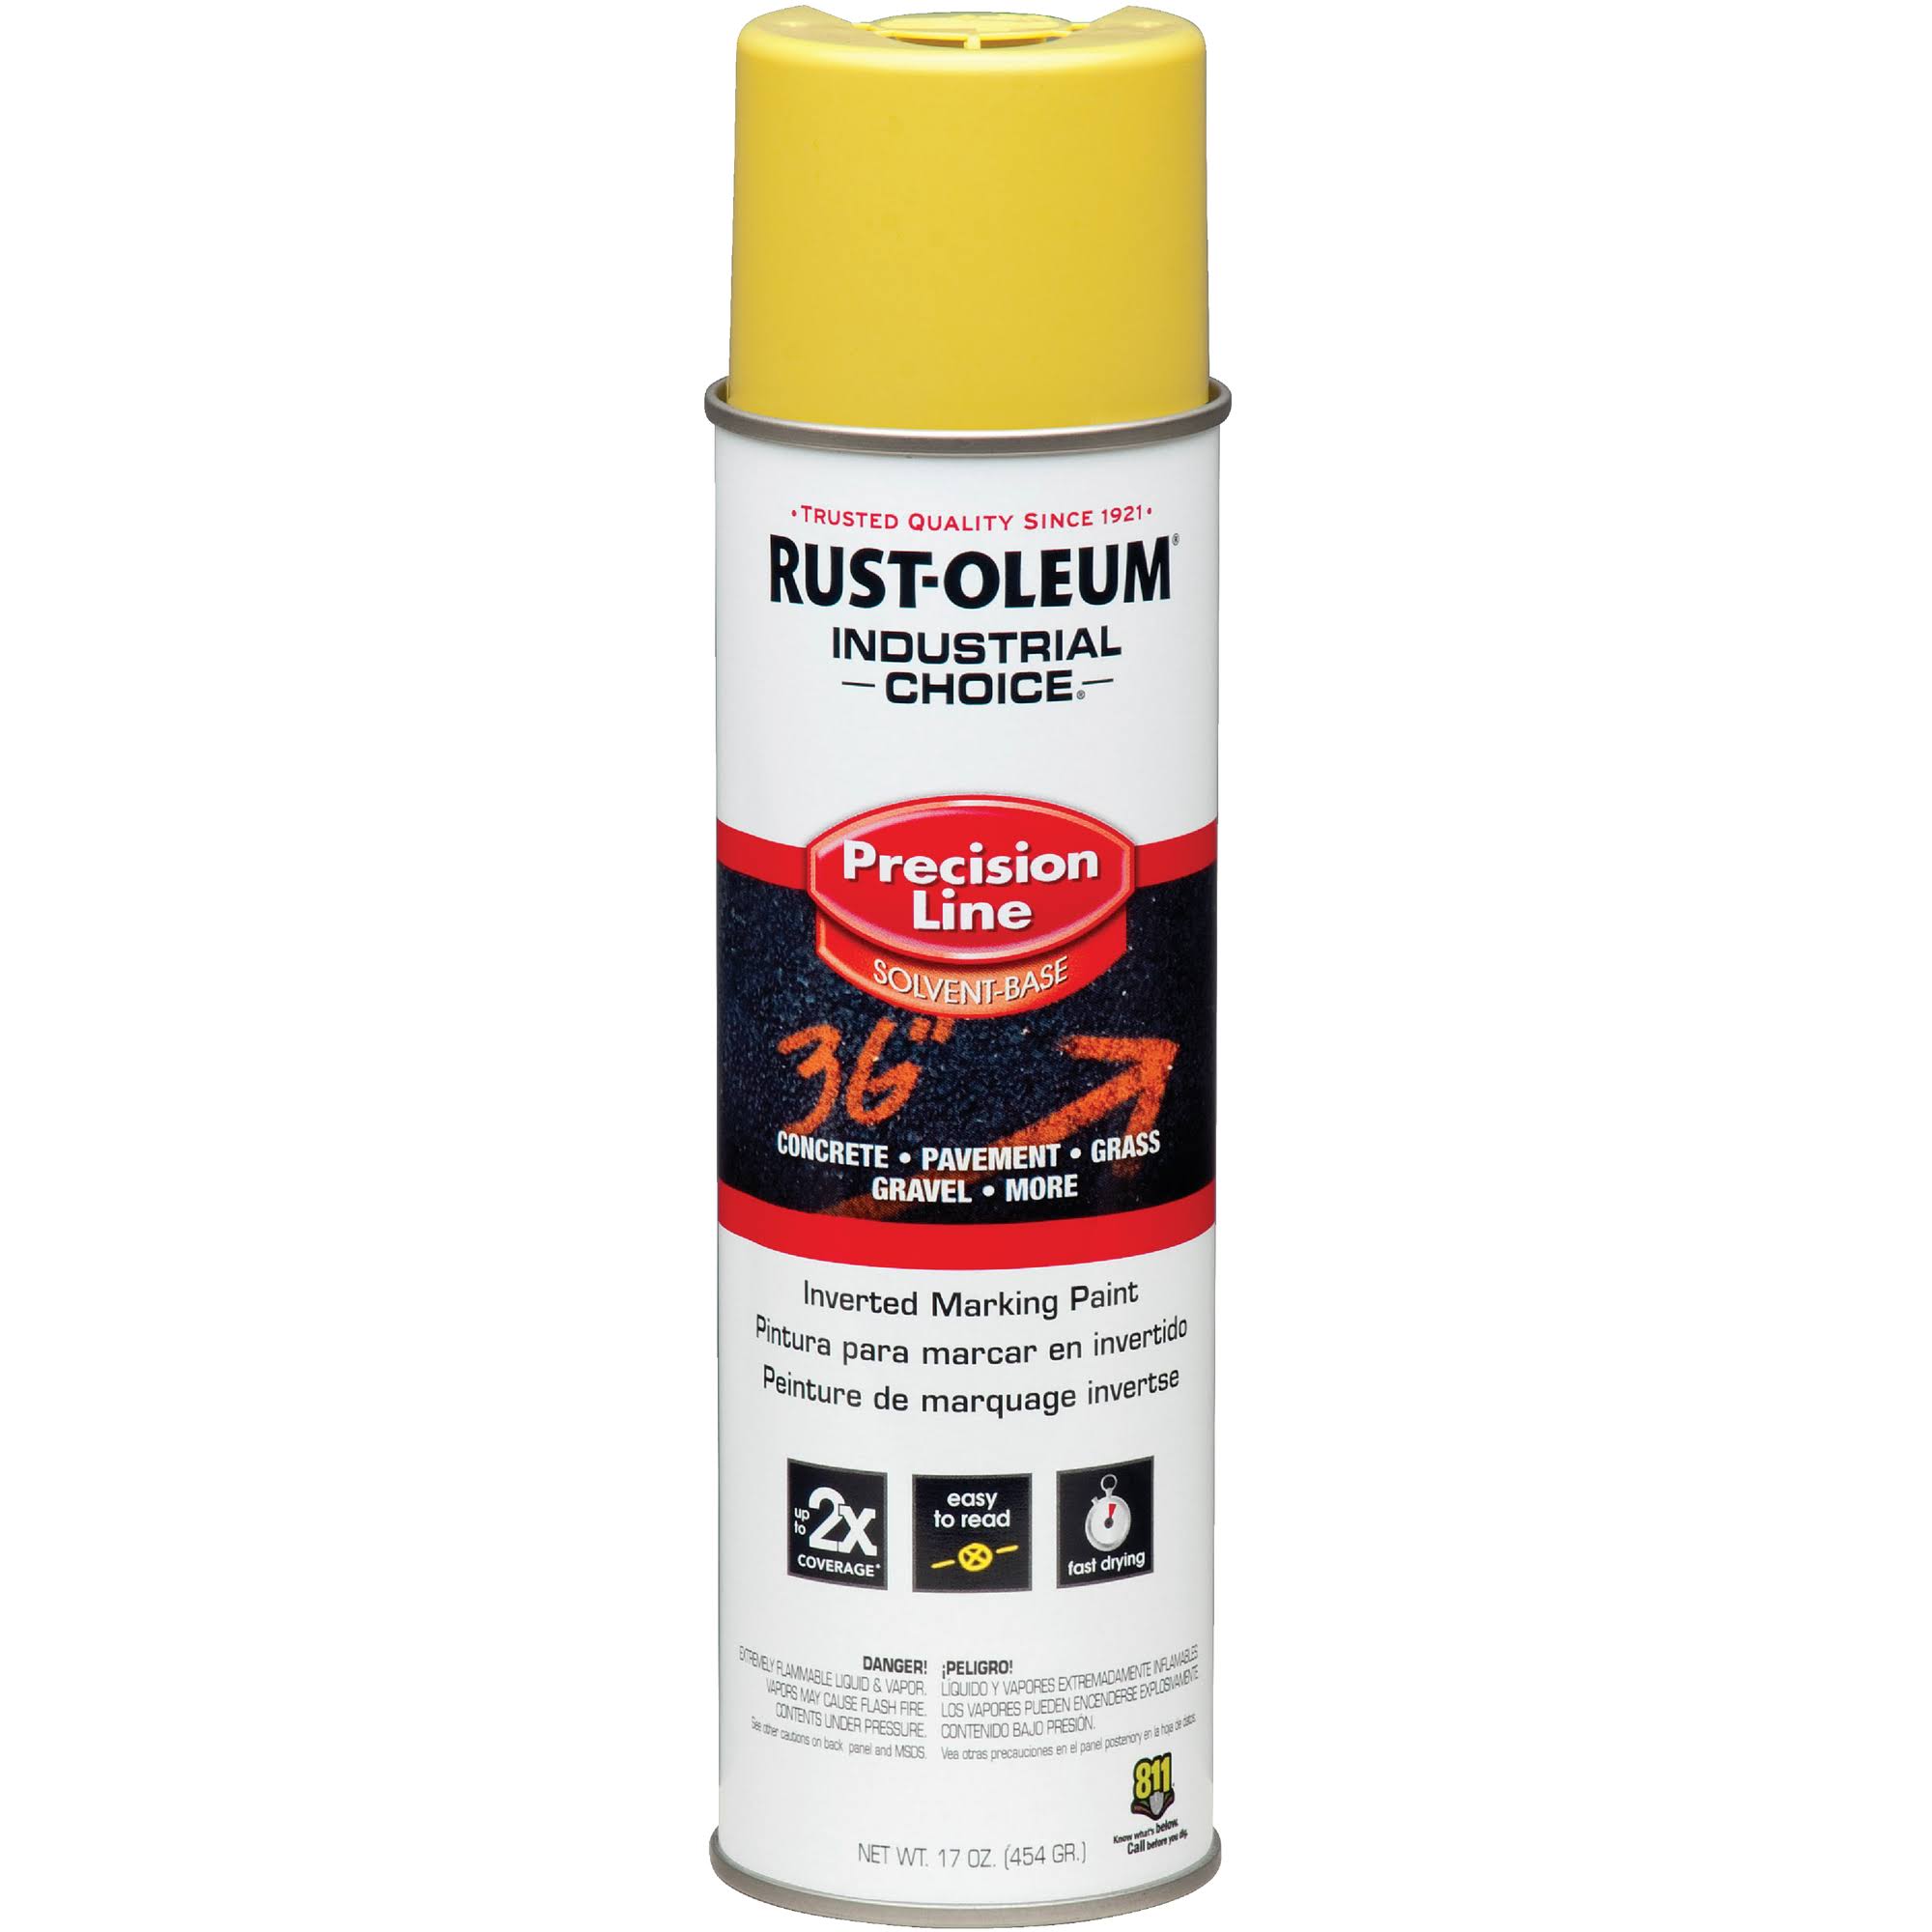 Rust-Oleum Industrial Choice Precision-Line Inverted Marking Paint - 500ml, High Visibility Yellow